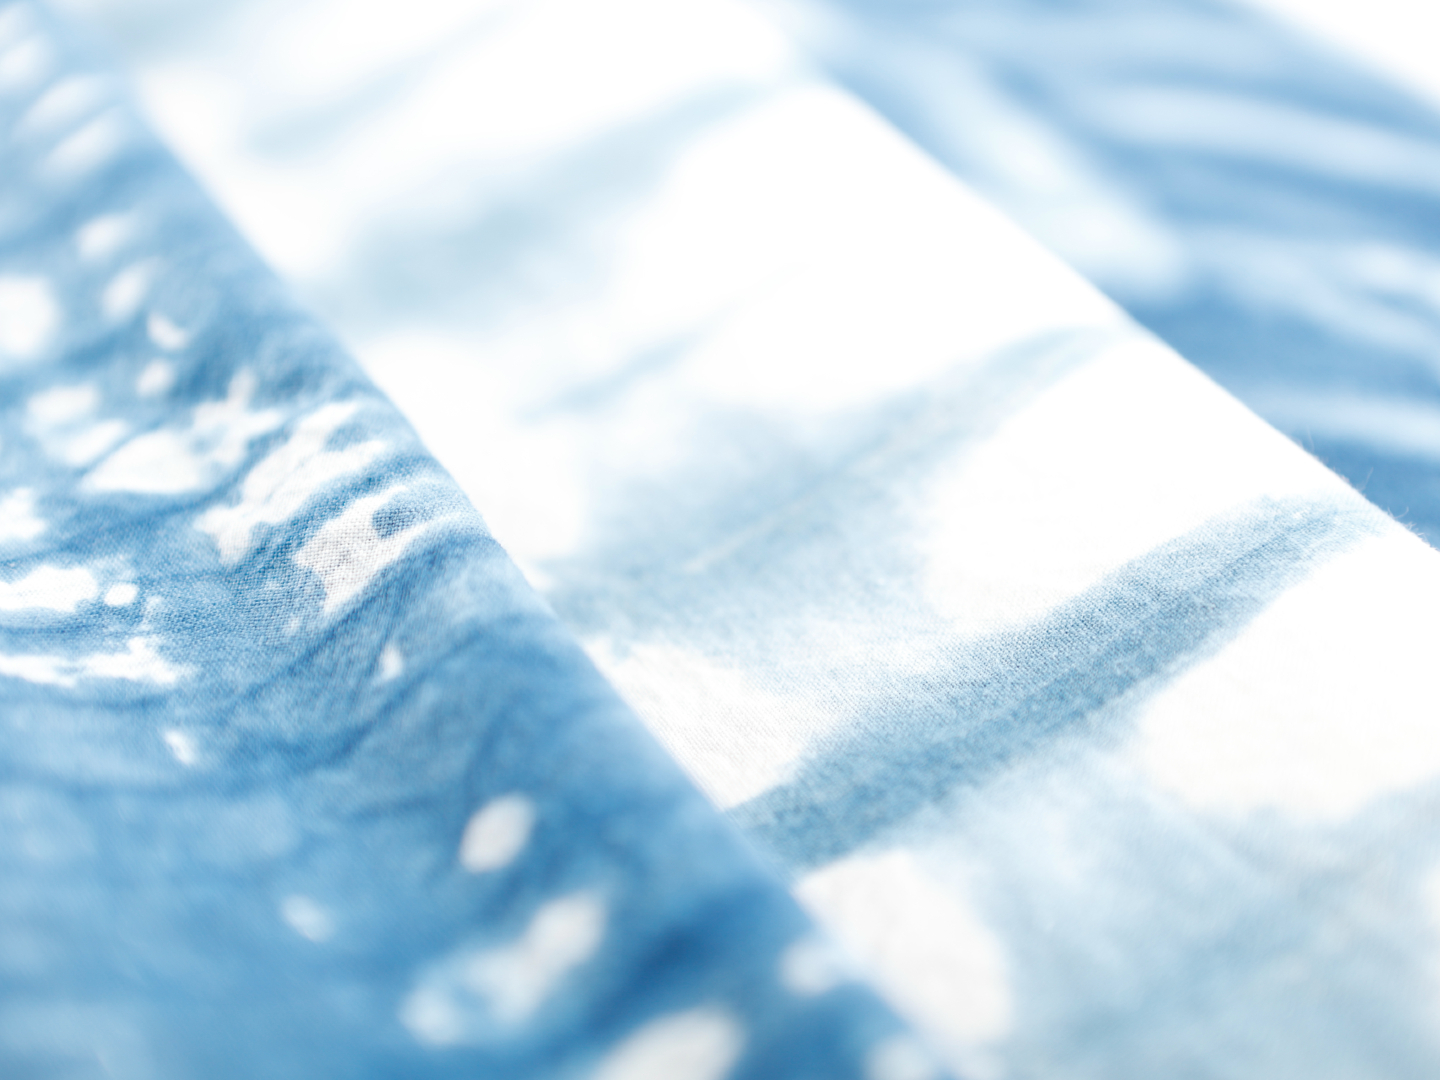 Close-up photo of a blue tie-dyed scarf.